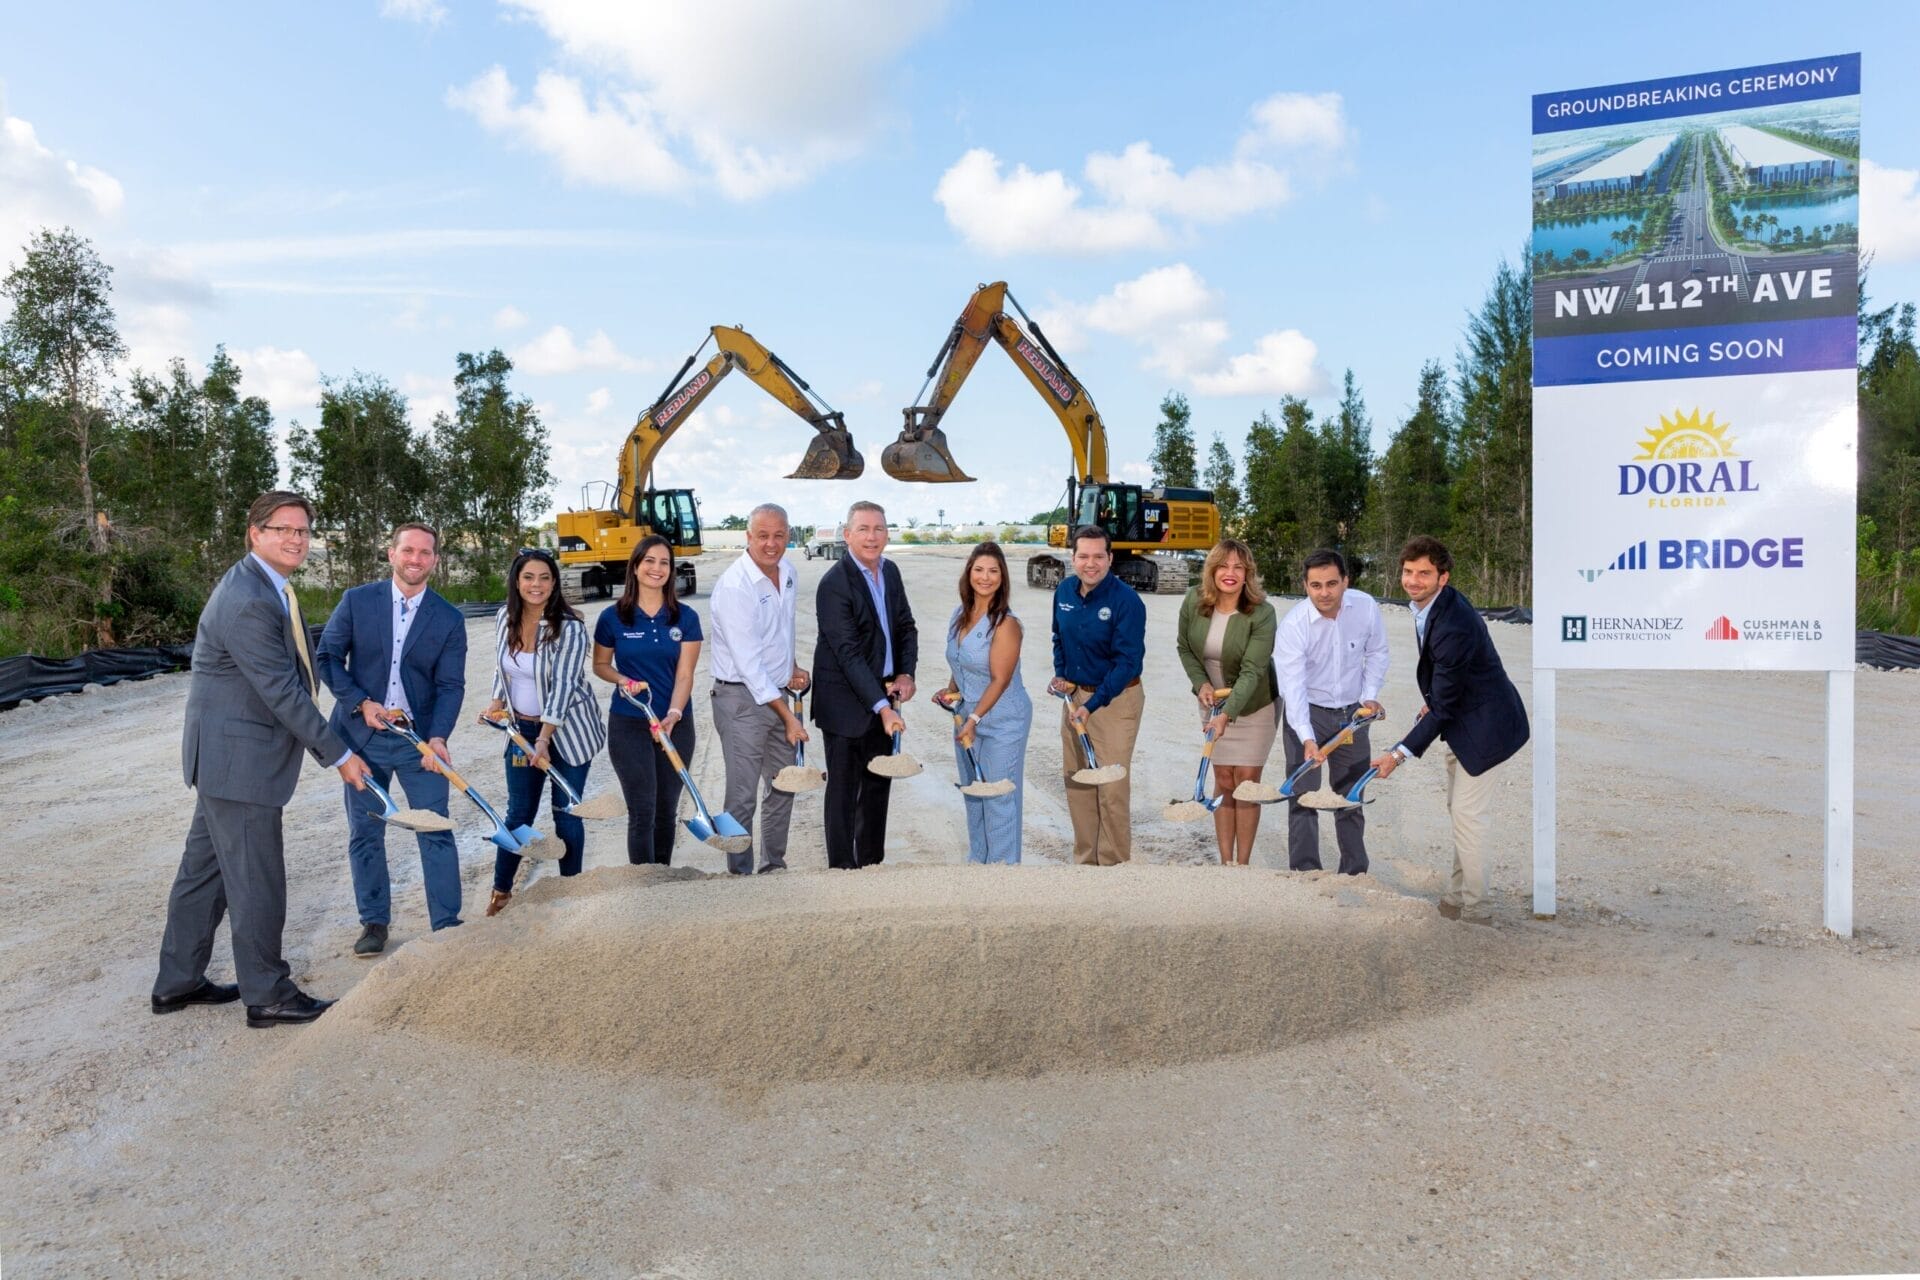 The City of Doral and Bridge Industrial Break Ground On New Access Road at NW 112th Ave in the Heart of the City